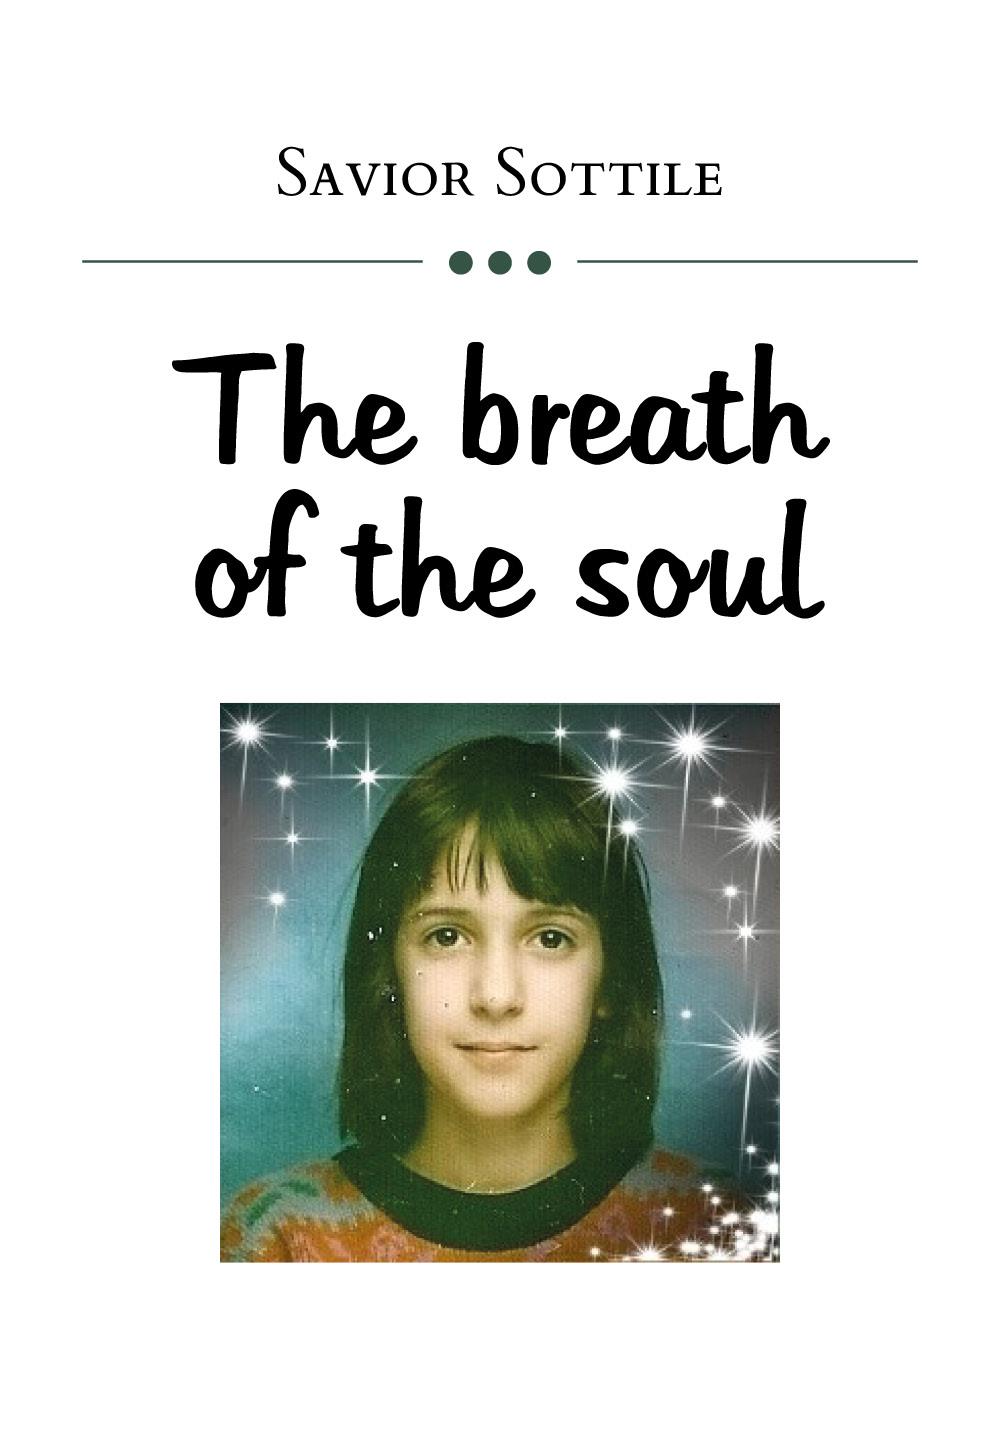 The breath of the soul